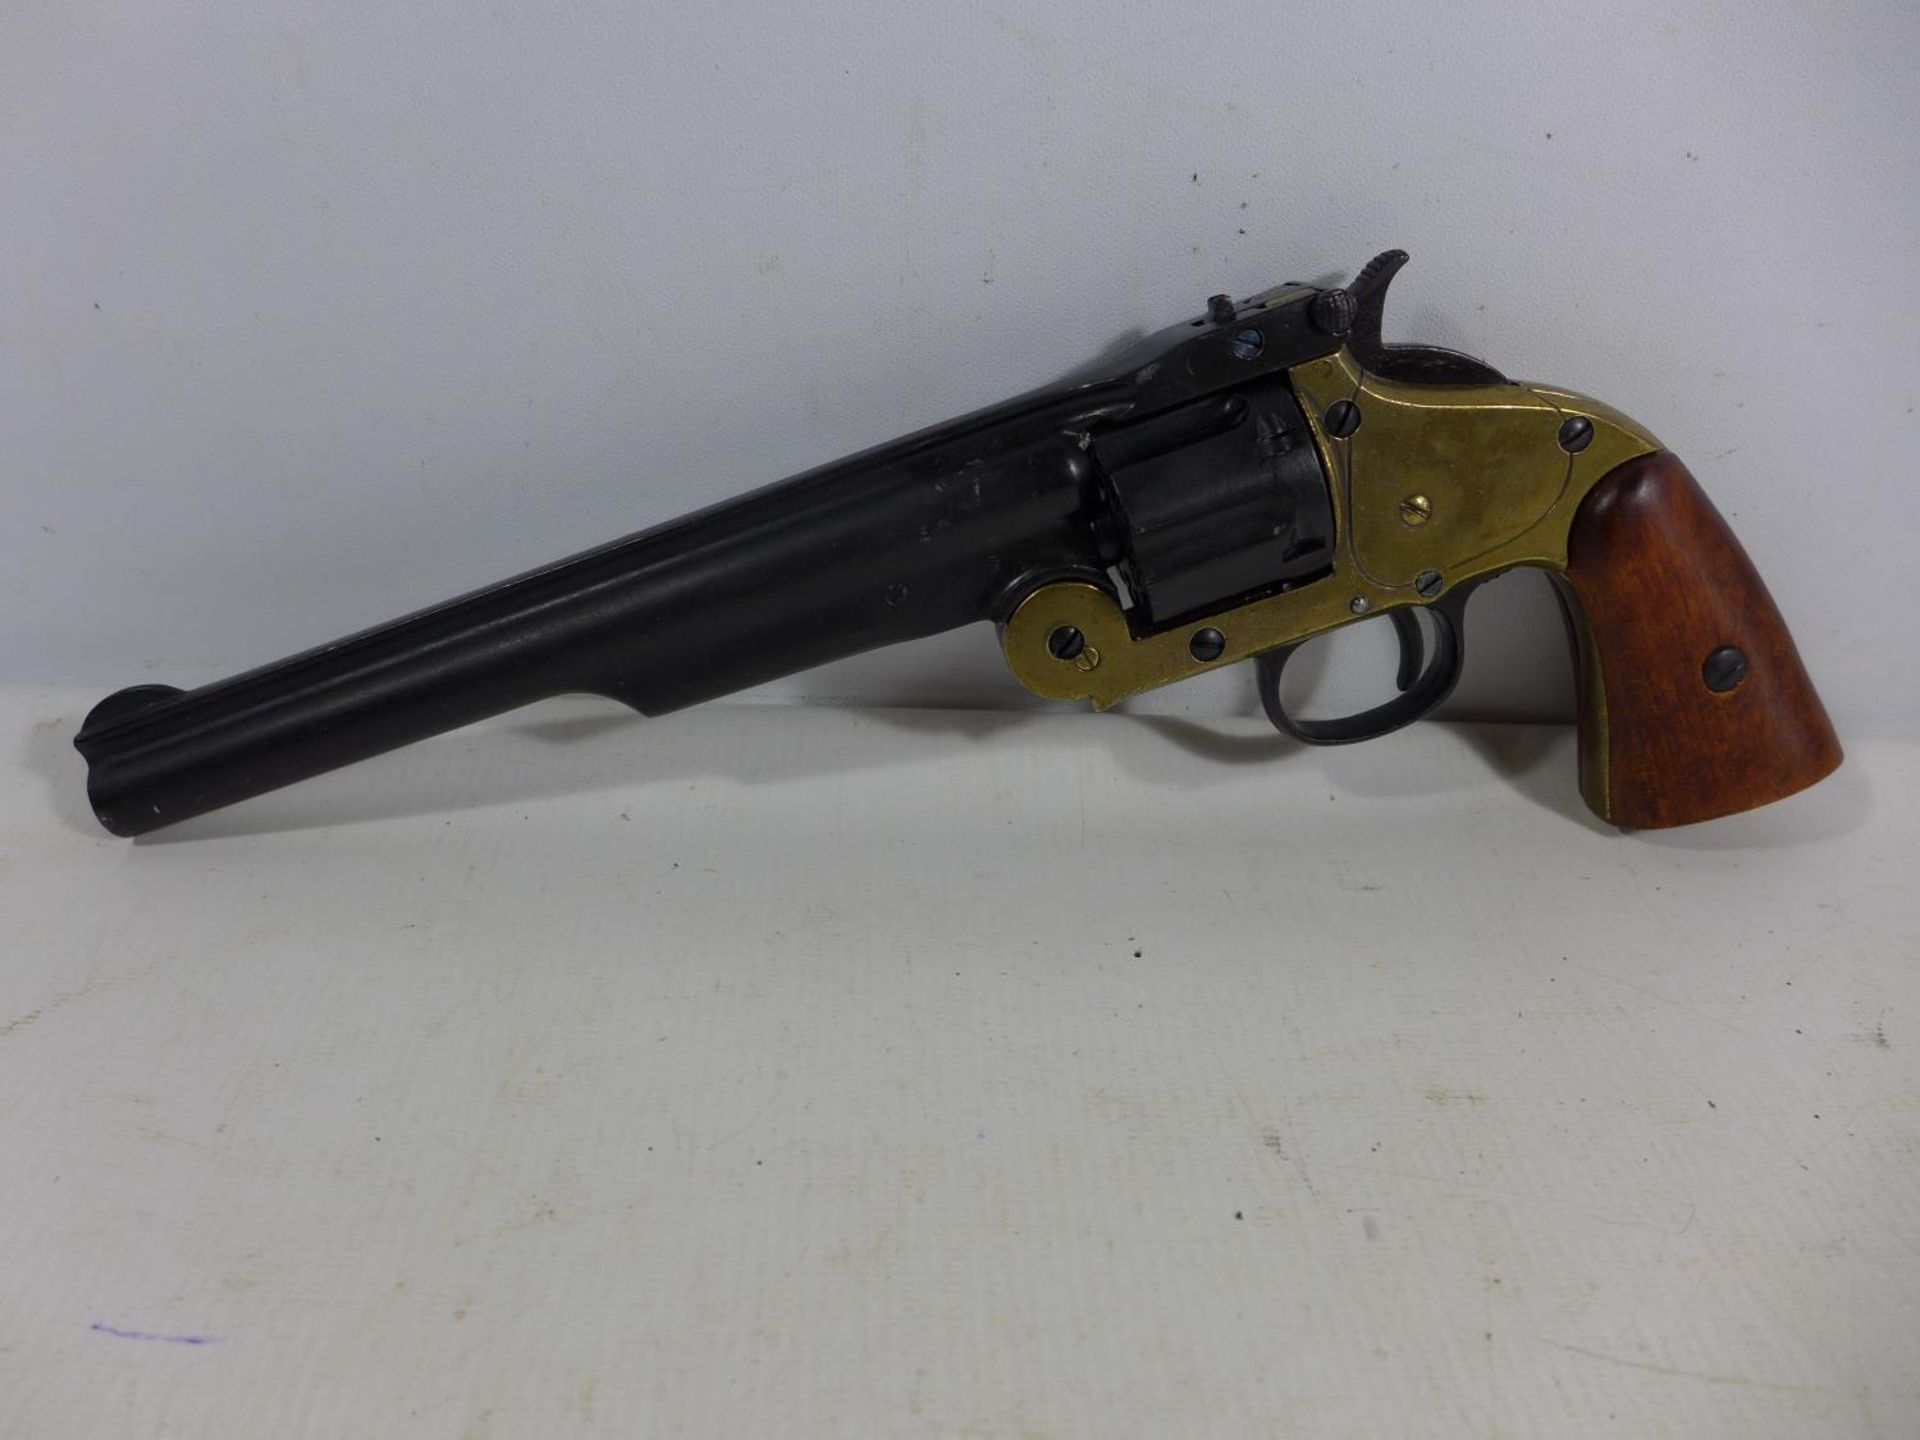 A GOOD QUALITY NON FIRING MODEL DISPLAY SMITH AND WESSON SCHOFIELD REVOLVER, 20CM BARREL, LENGTH - Image 2 of 4